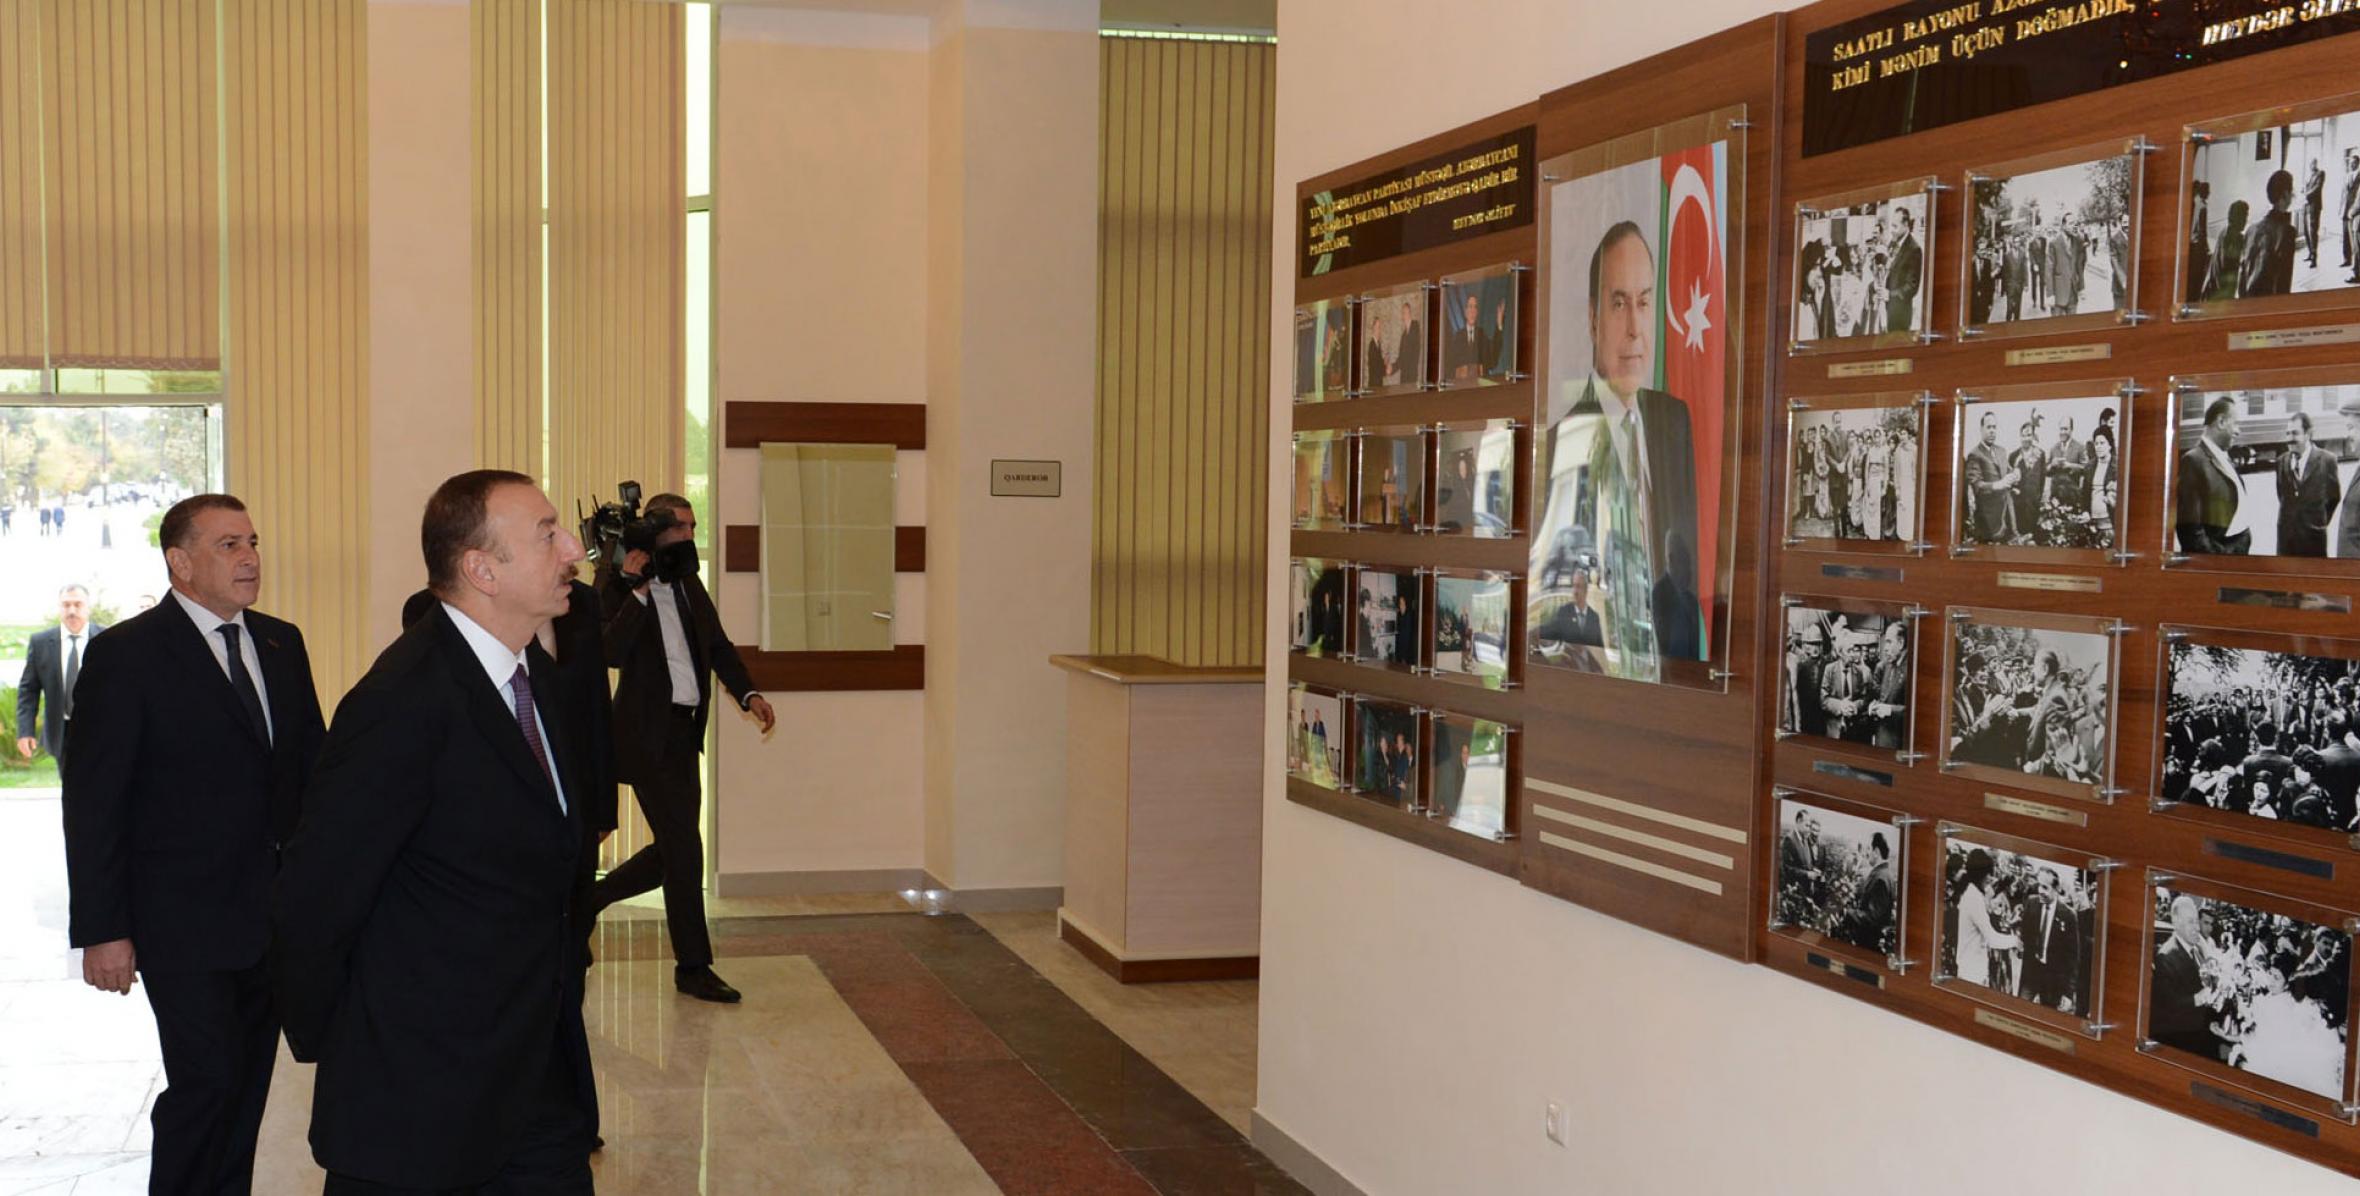 Ilham Aliyev attended the opening of a new office building of the Saatli district branch of the “Yeni Azerbaijan Party”